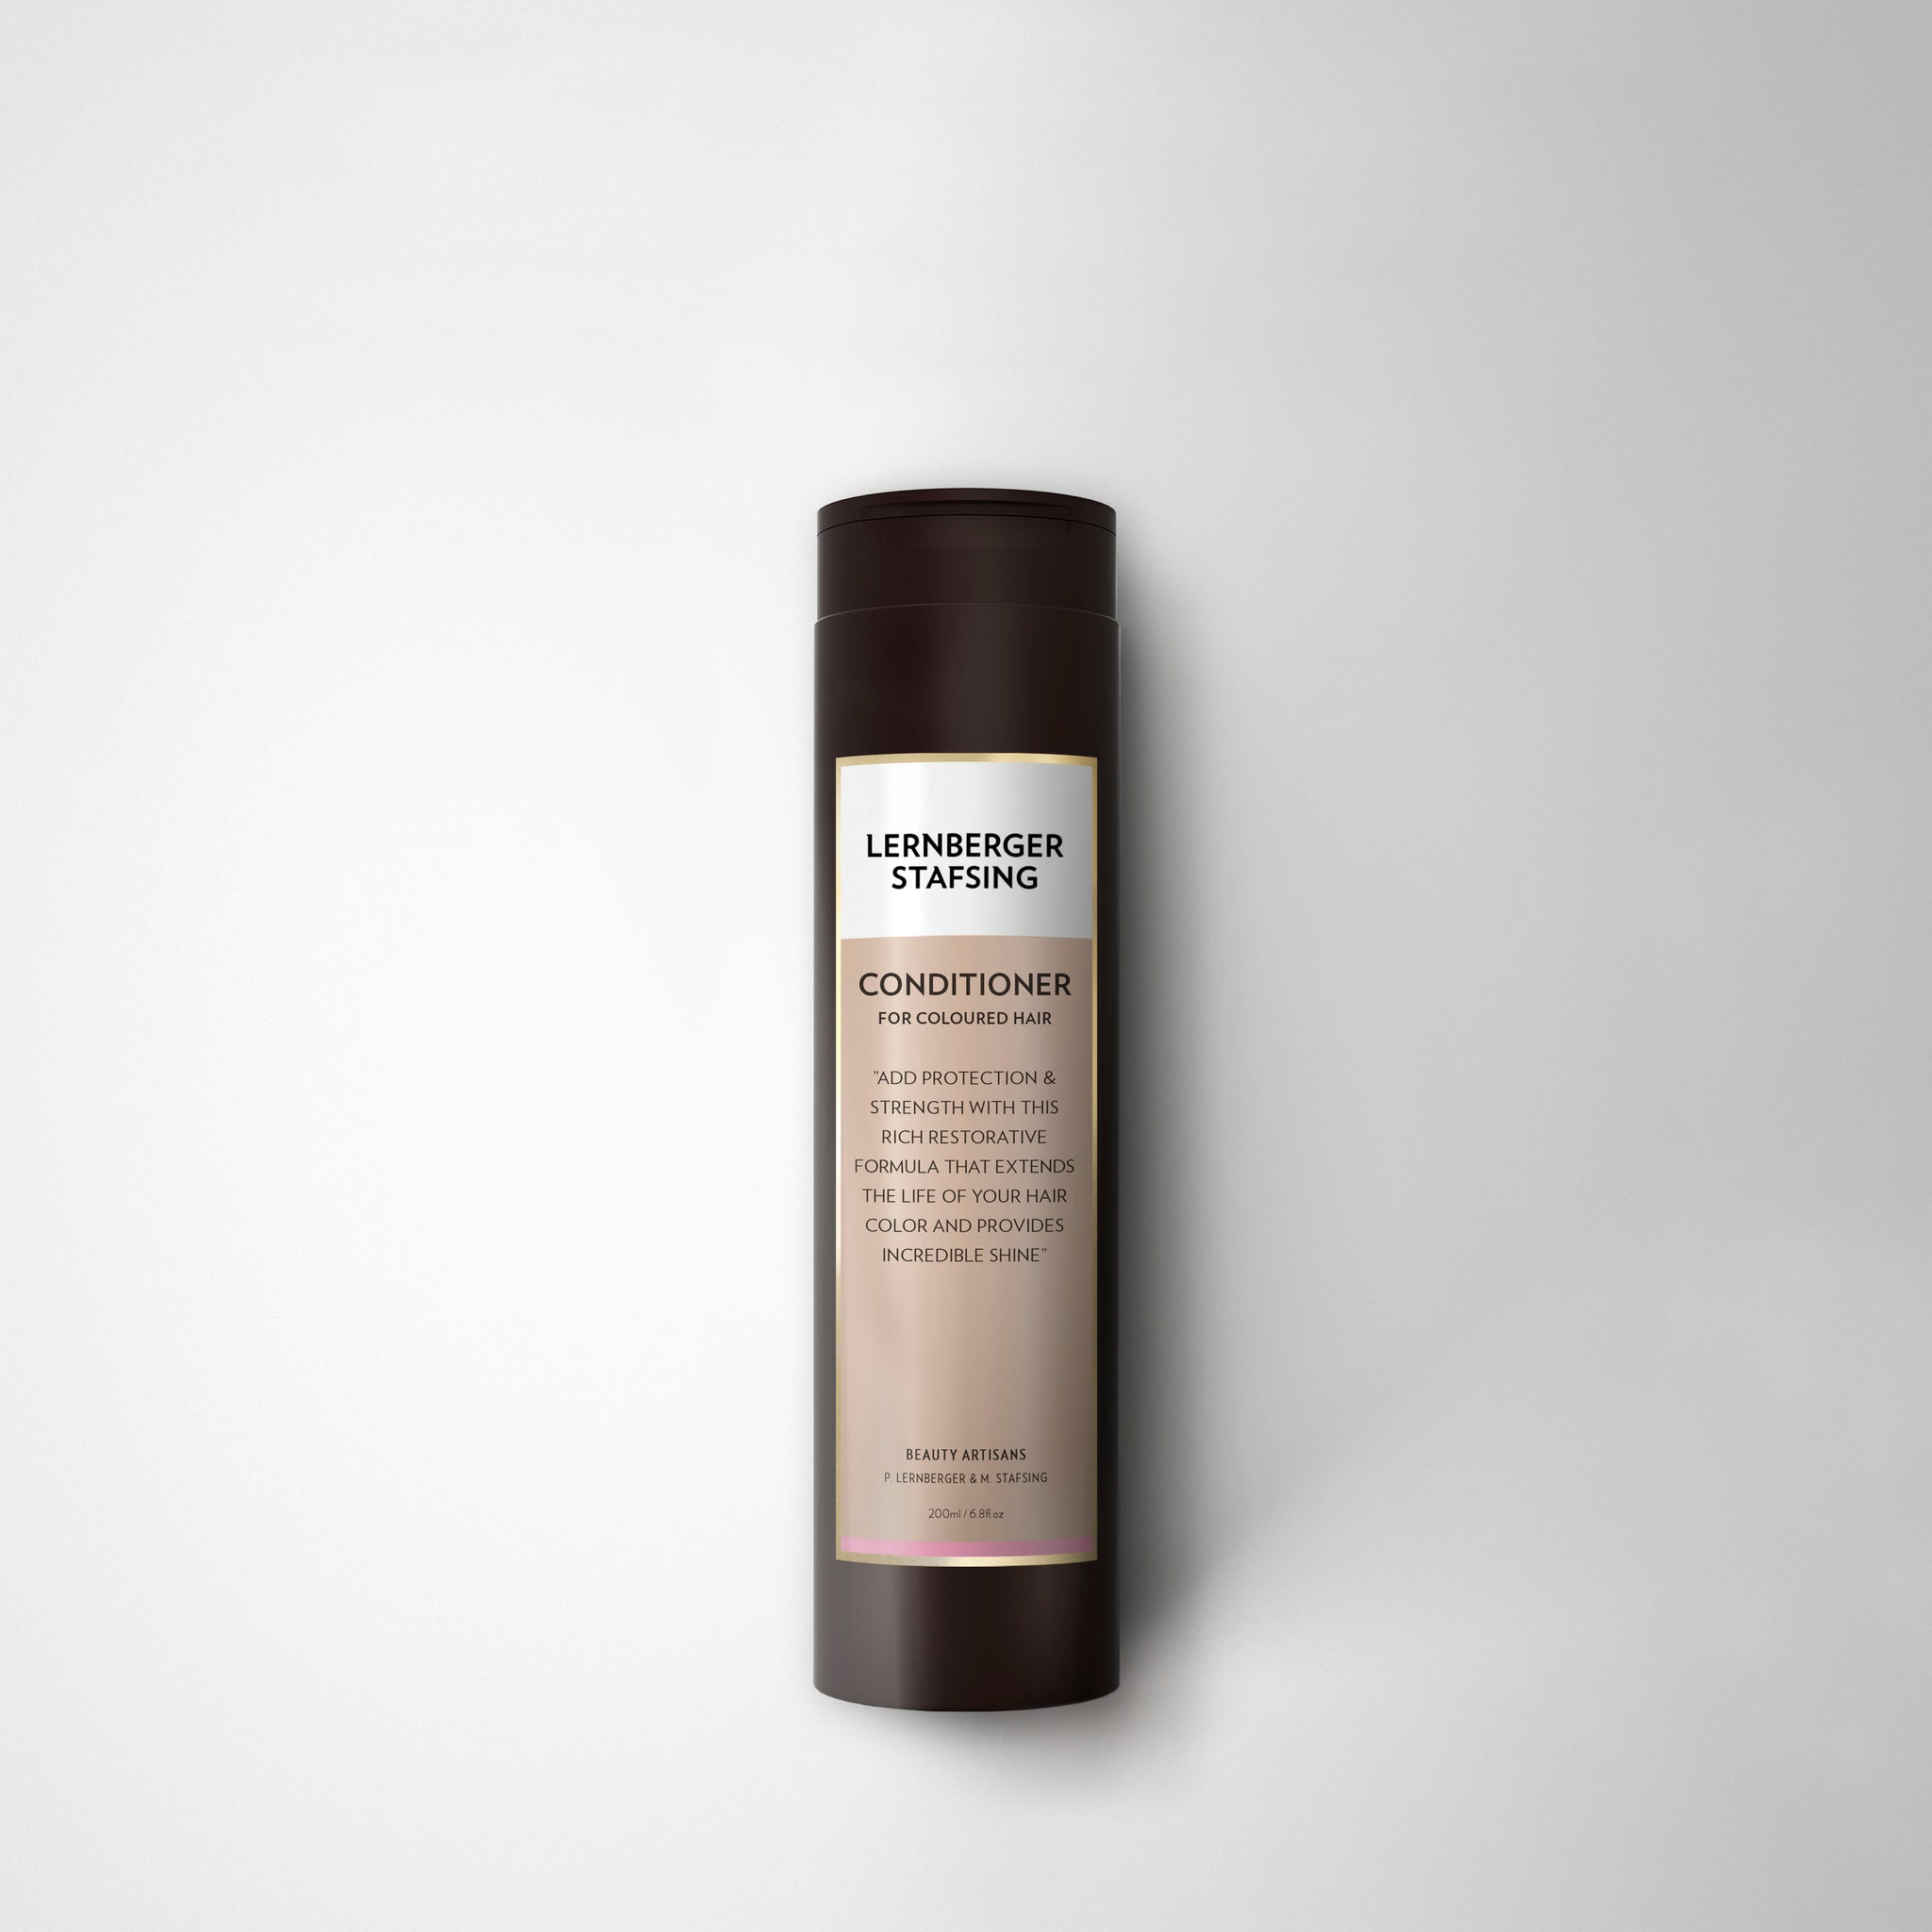 【Pre-order預訂】LERNBERGER STAFSING Conditioner for Coloured Hair  溫和鎖色修護護髮素 200ml